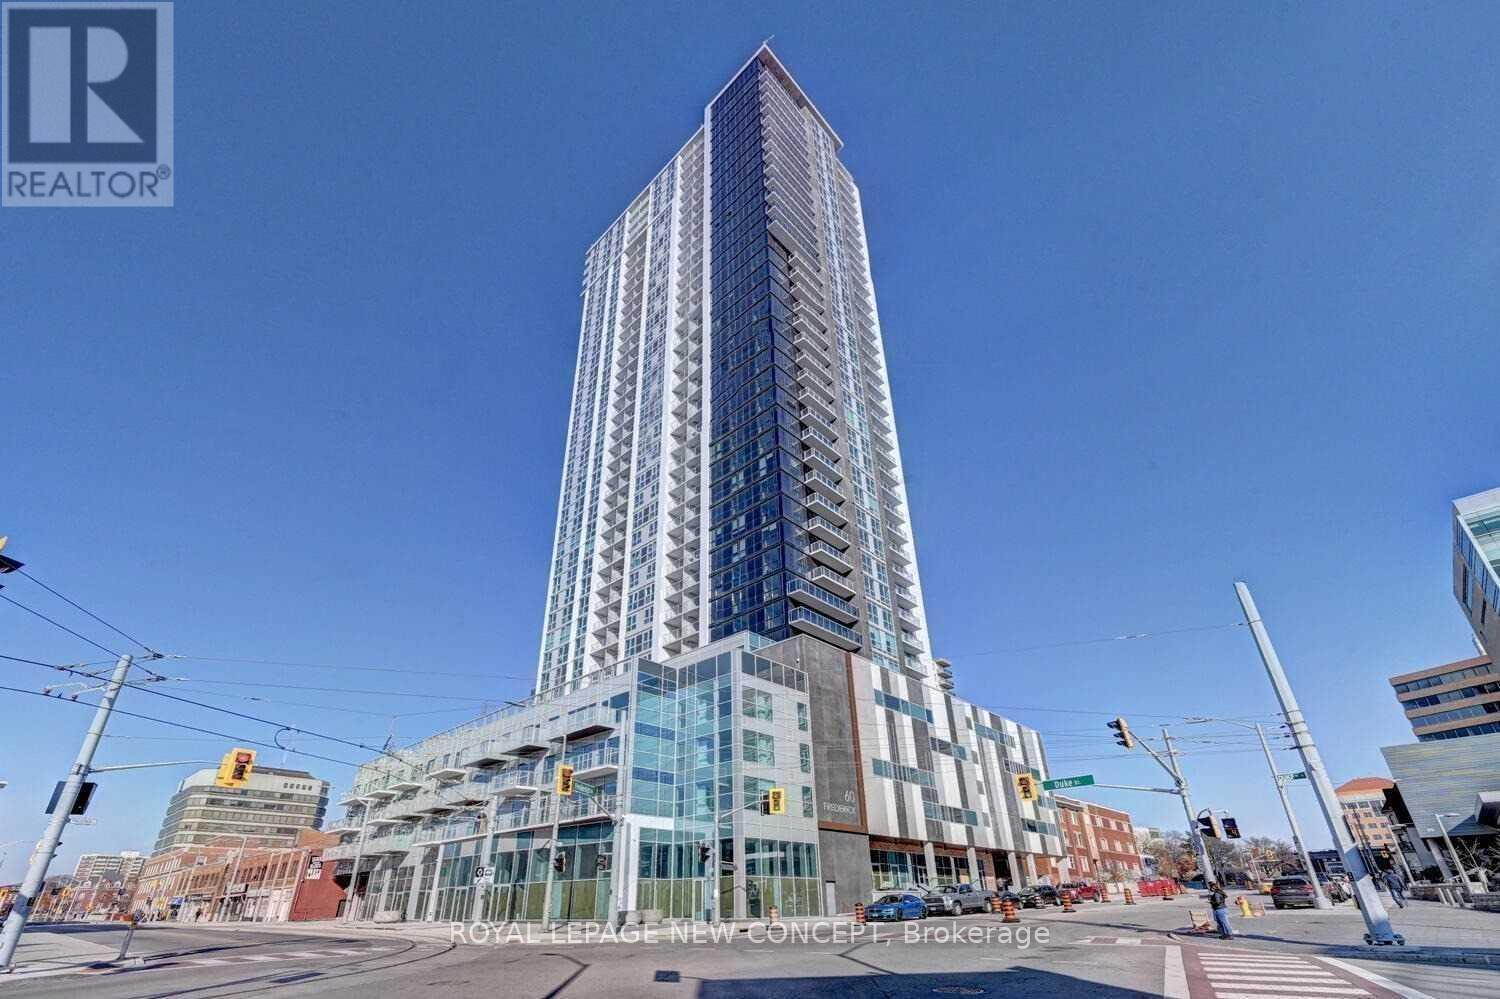 Property at #202 -60 FREDERICK ST image 1